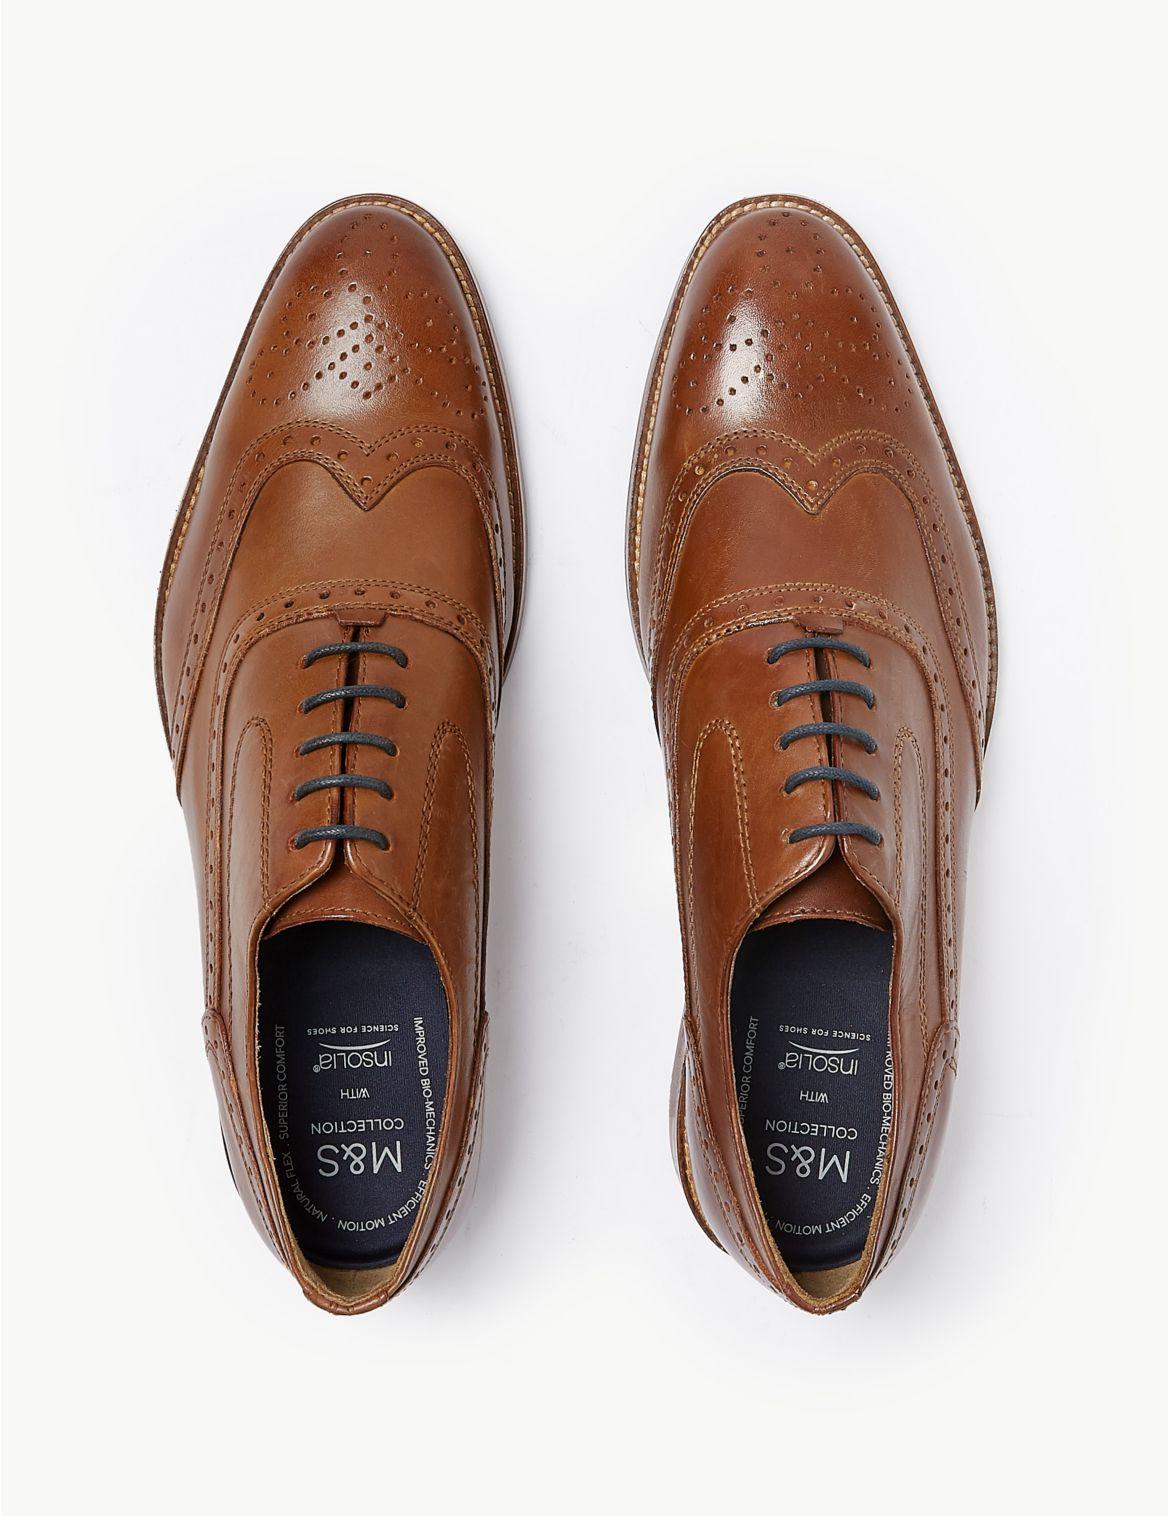 Marks & Spencer Leather Layered Sole Brogue Shoes in Brown for Men - Lyst